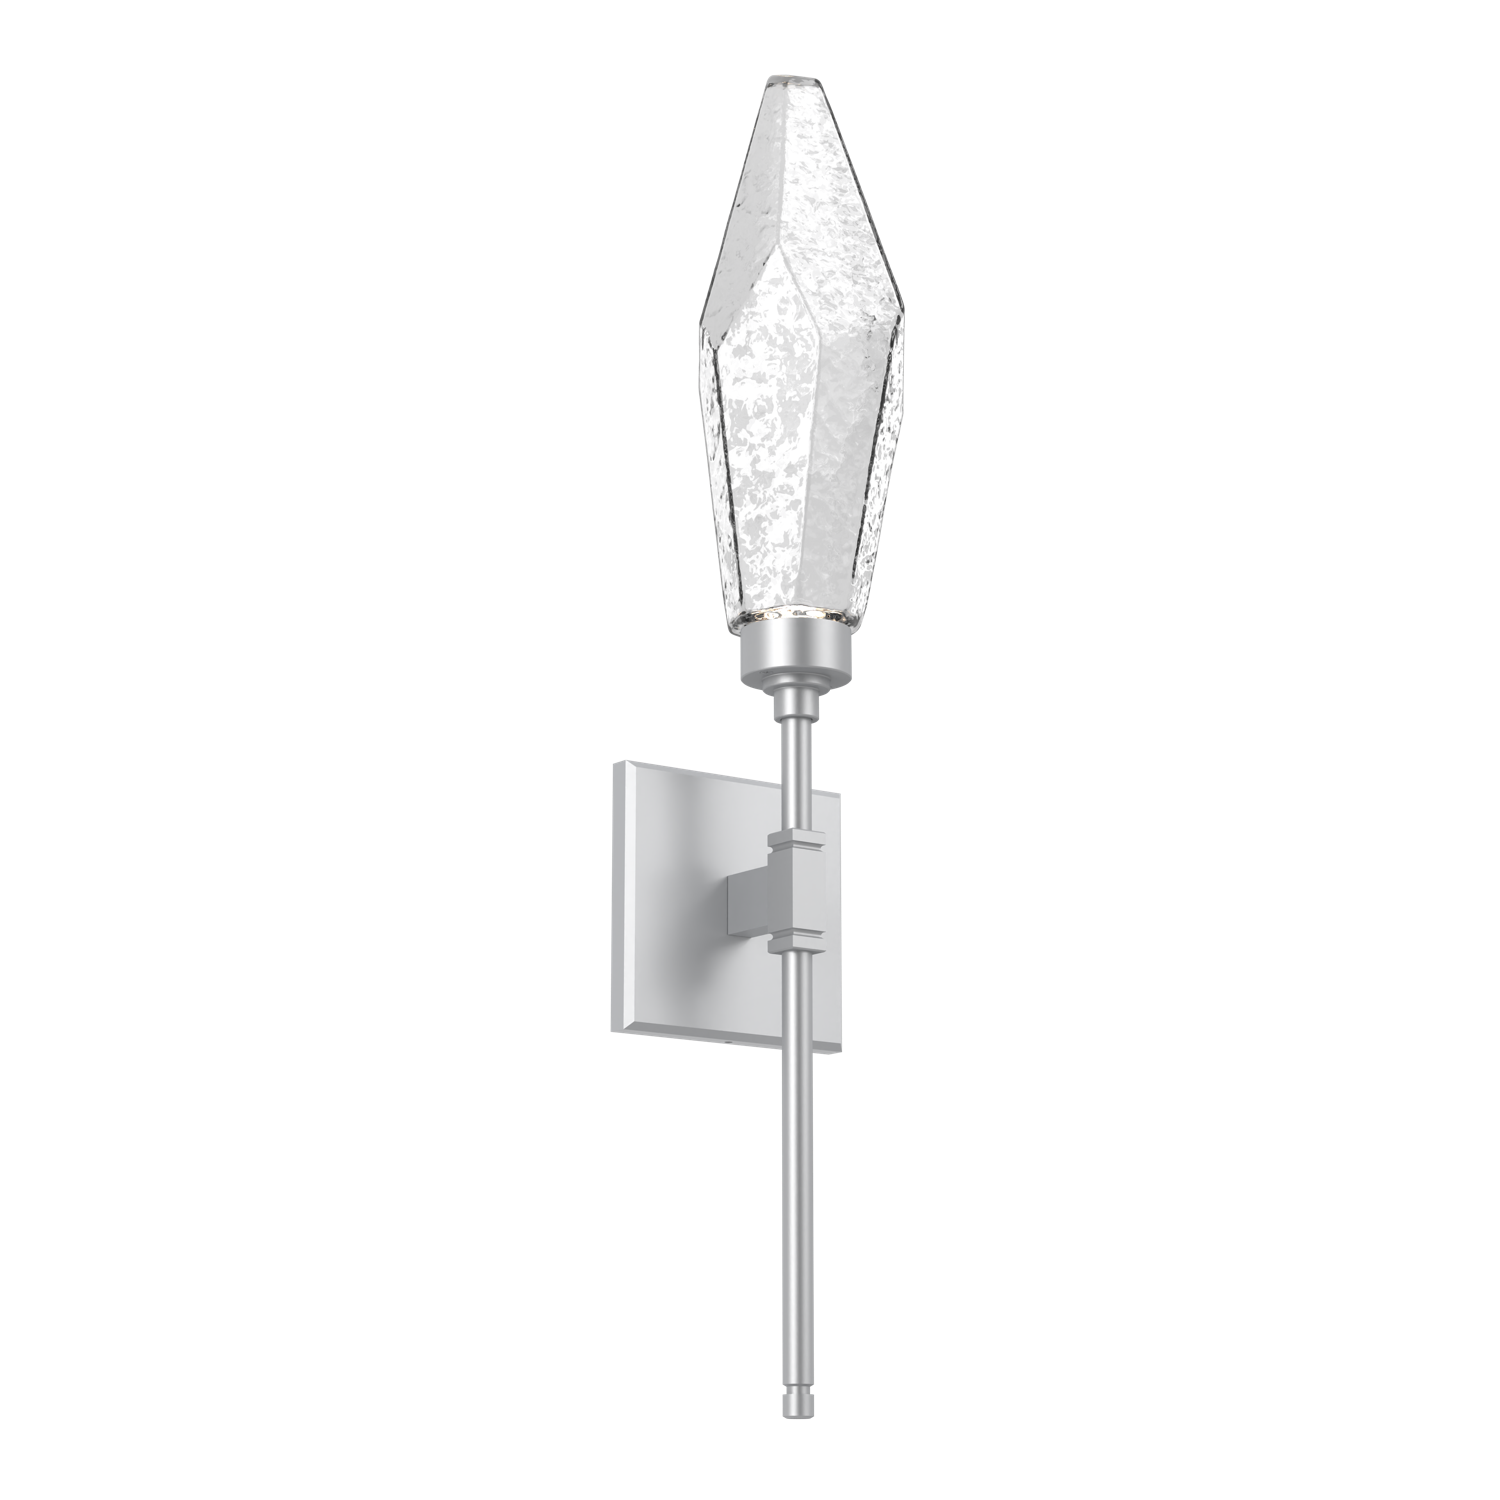 IDB0050-04-CS-CC-Hammerton-Studio-Rock-Crystal-ada-certified-belvedere-wall-sconce-with-classic-silver-finish-and-clear-glass-shades-and-LED-lamping